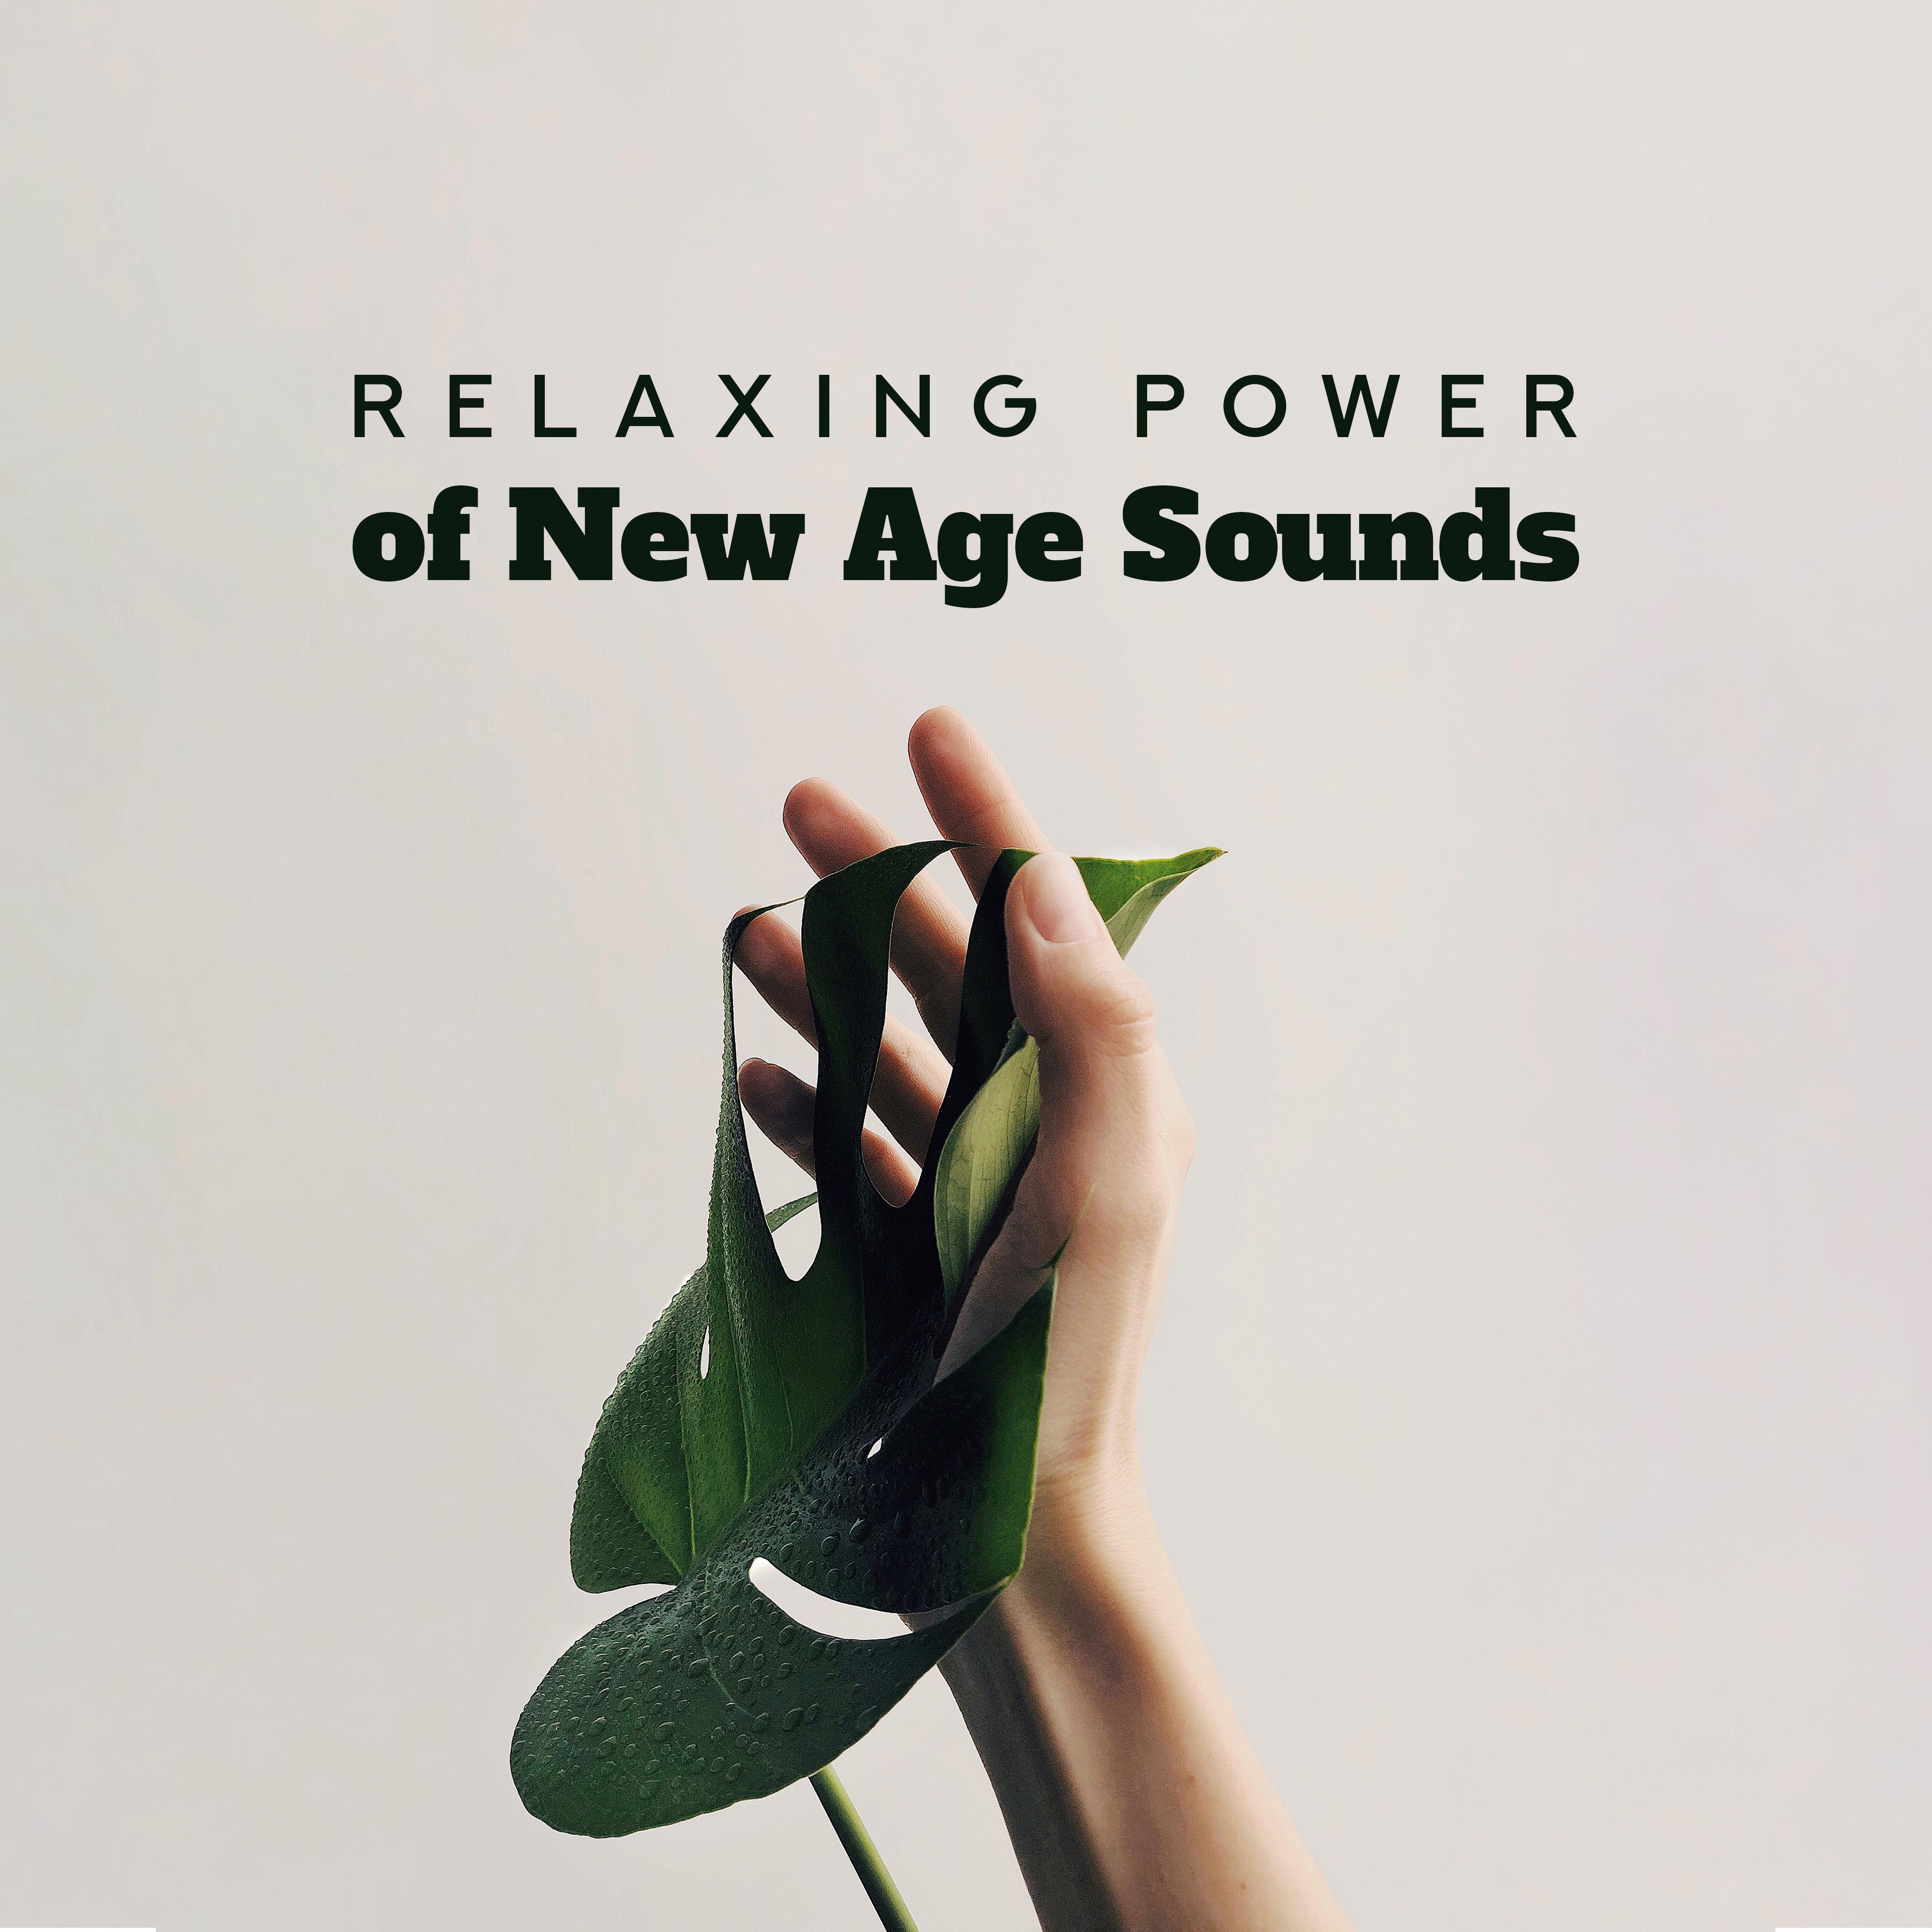 Relaxing Power of New Age Sounds: 2019 Soothing Music for Total Relaxation, Calming Down, Stress Relief, Soft Sounds of Sax, Violin, Piano & Others